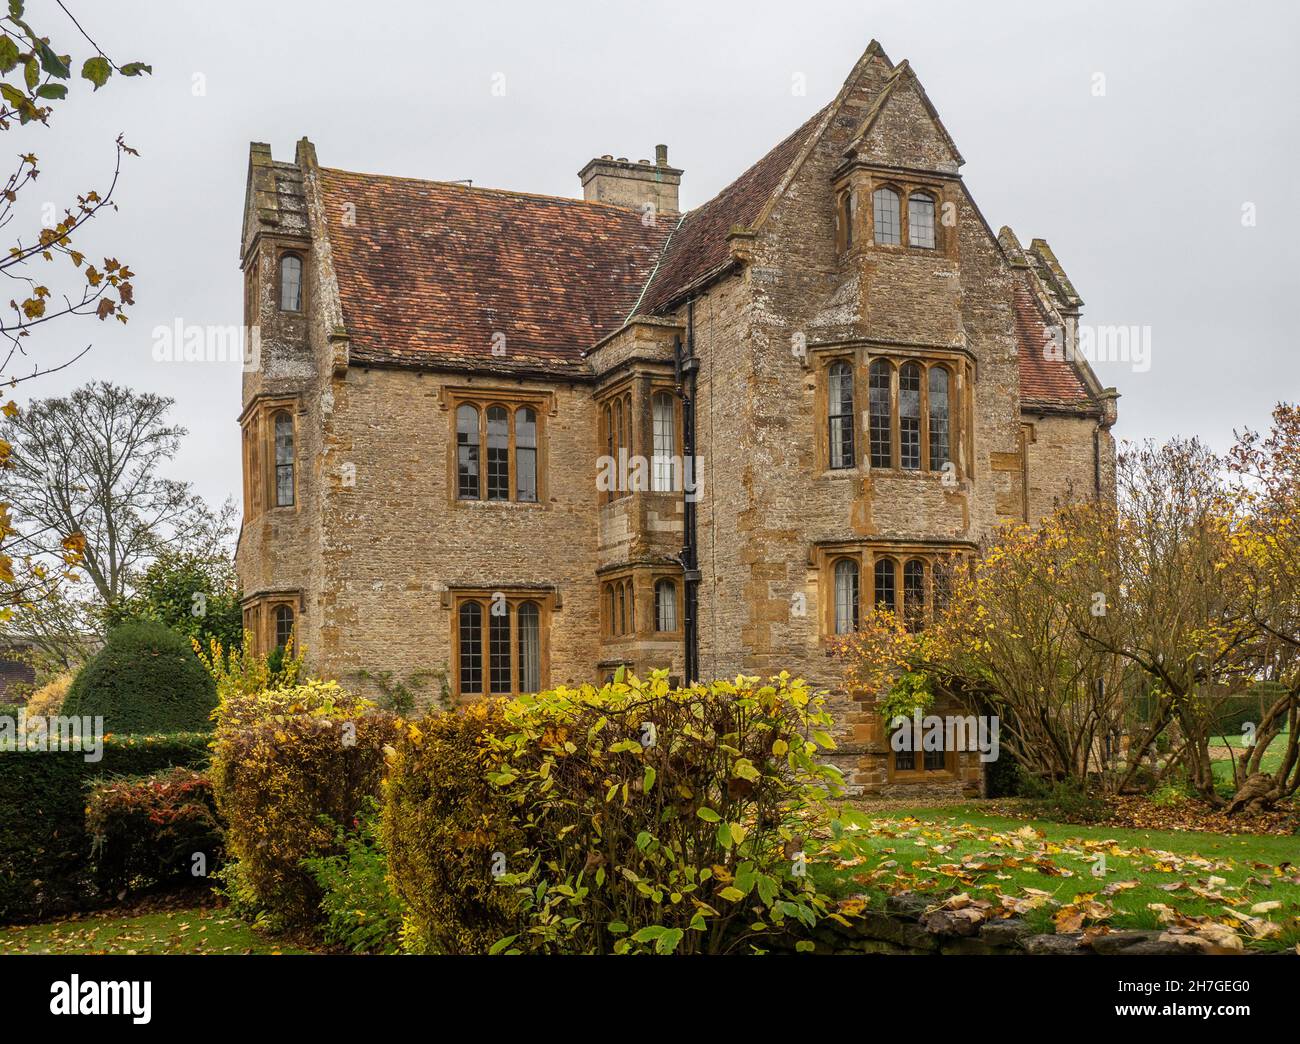 Historic Tudor manor house dating from 1540 in the village of Gayton, Northamptonshire, UK Stock Photo